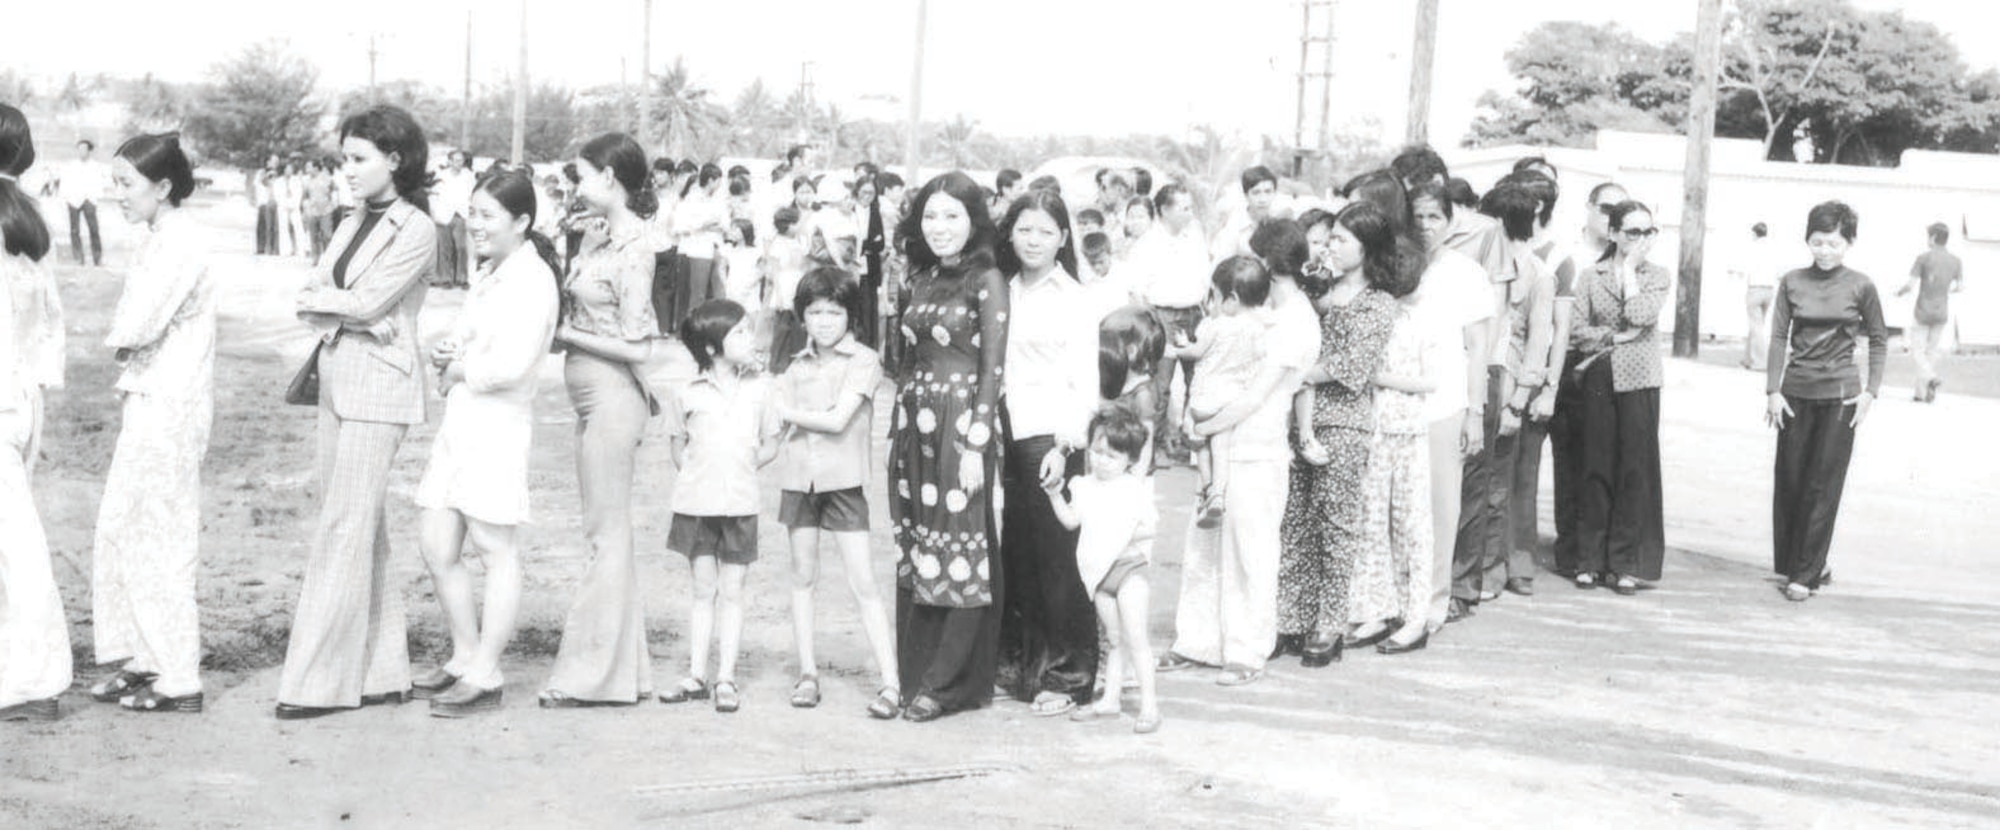 New Life refugees waiting in line at Andersen's “Tin City” barracks. (Photo courtesy of the 36th Wing History Office)